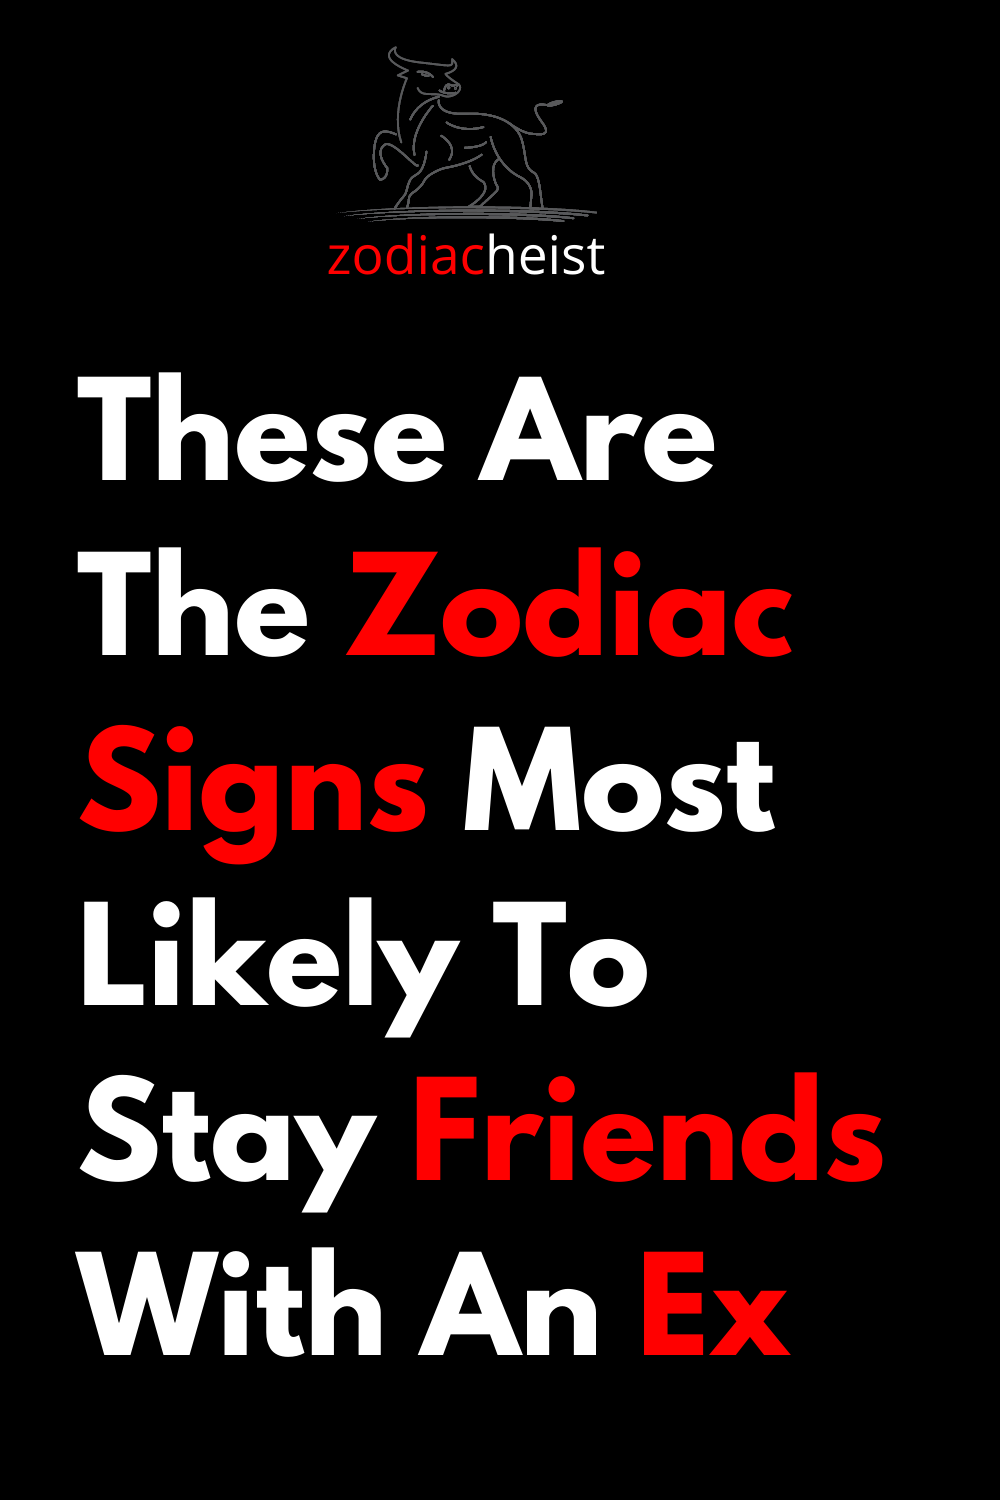 These Are The Zodiac Signs Most Likely To Stay Friends With An Ex